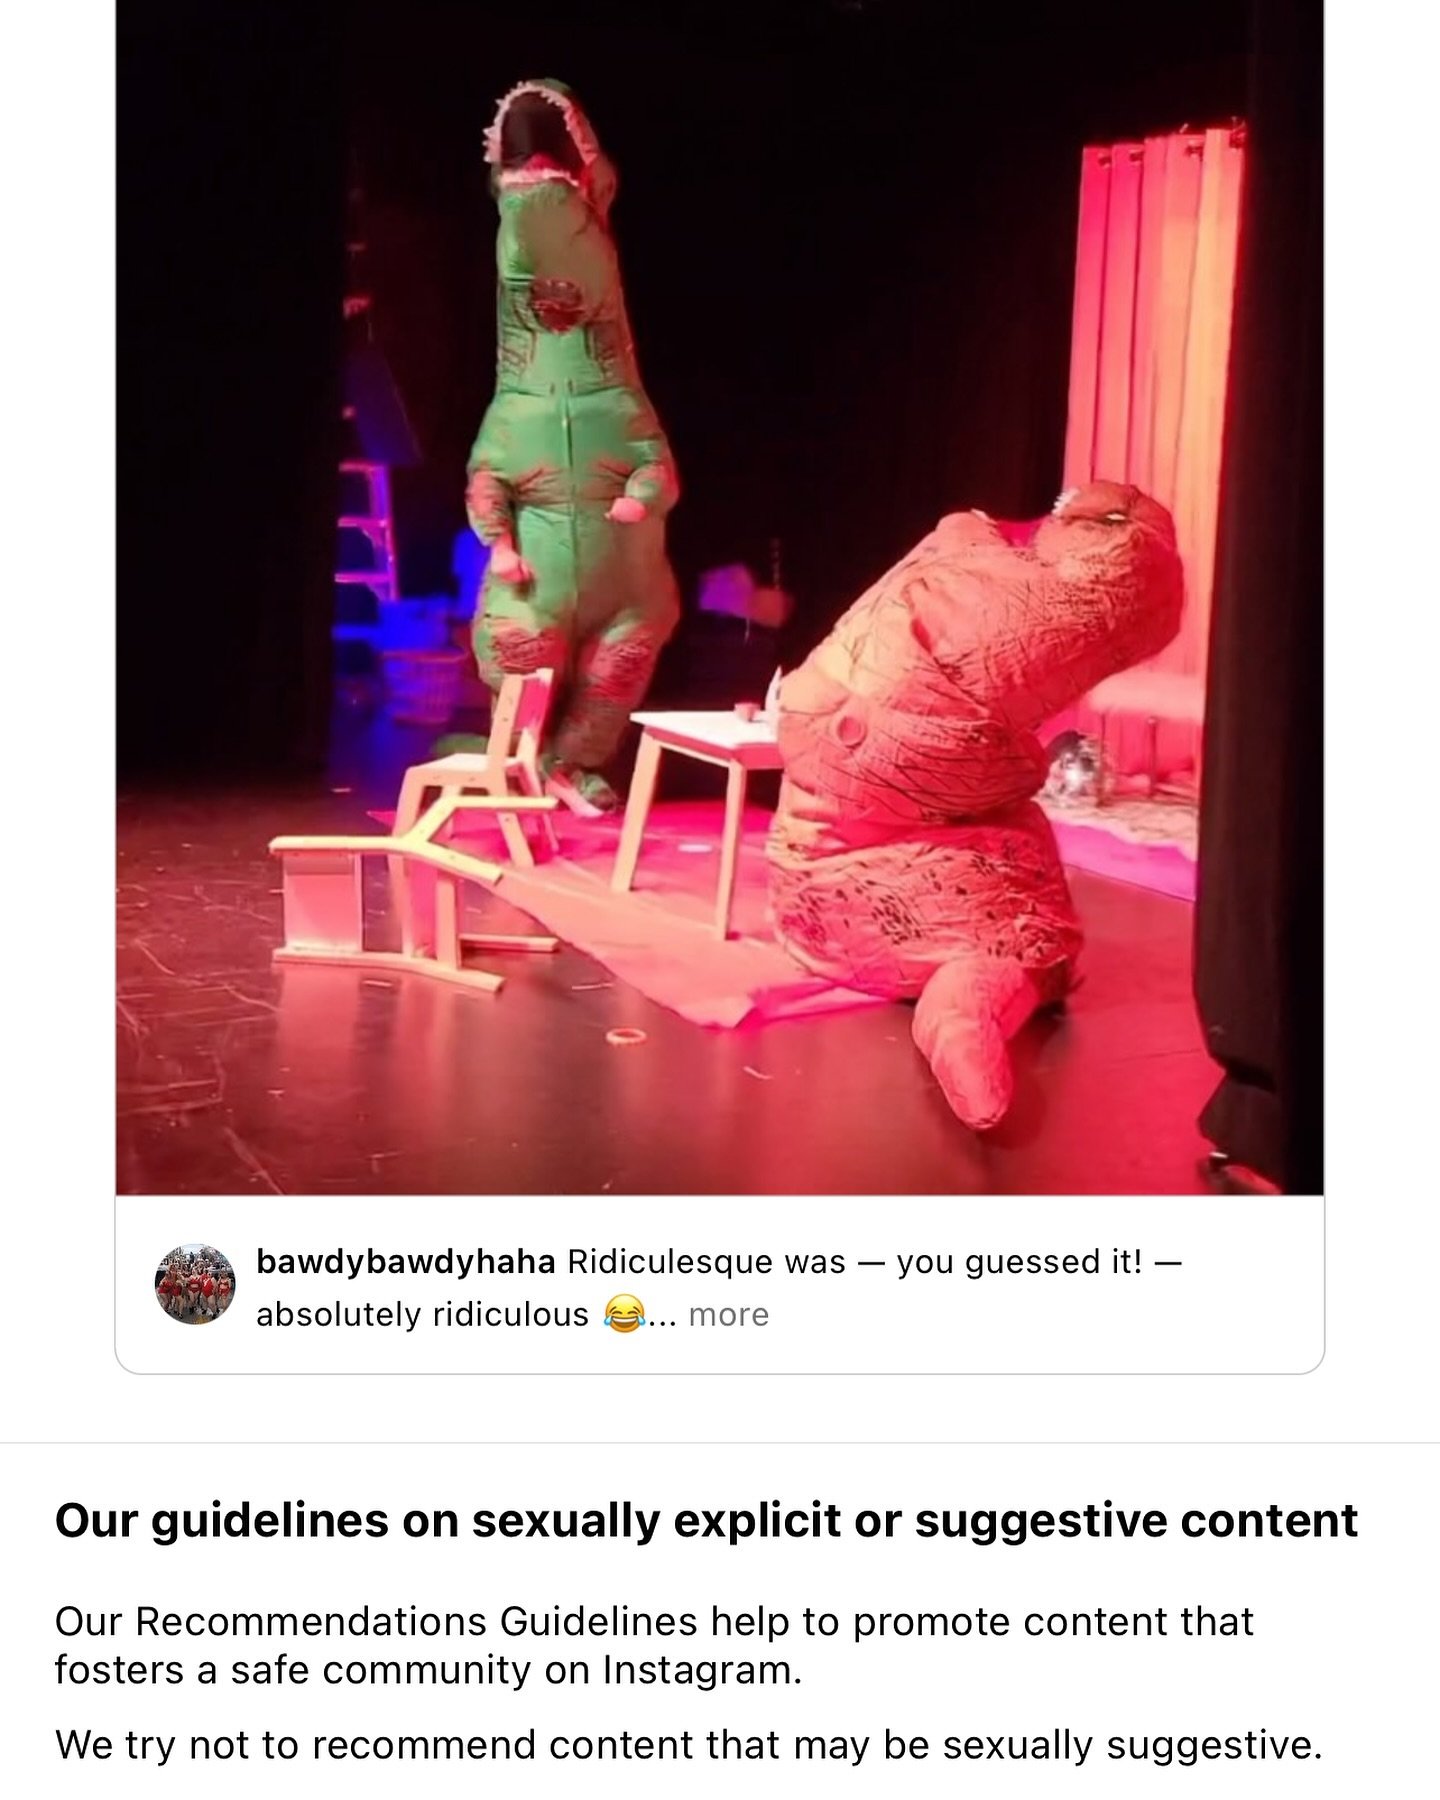 RIP to that beautiful reel of Ridiculesque performers we had to take down, but enjoy the absurdity of this mashup 😂 As @moxiehartburlesque said, &ldquo;Wow. Bawdy finally did it! And it only took two replicas of dinosaurs pouring tea made out of the